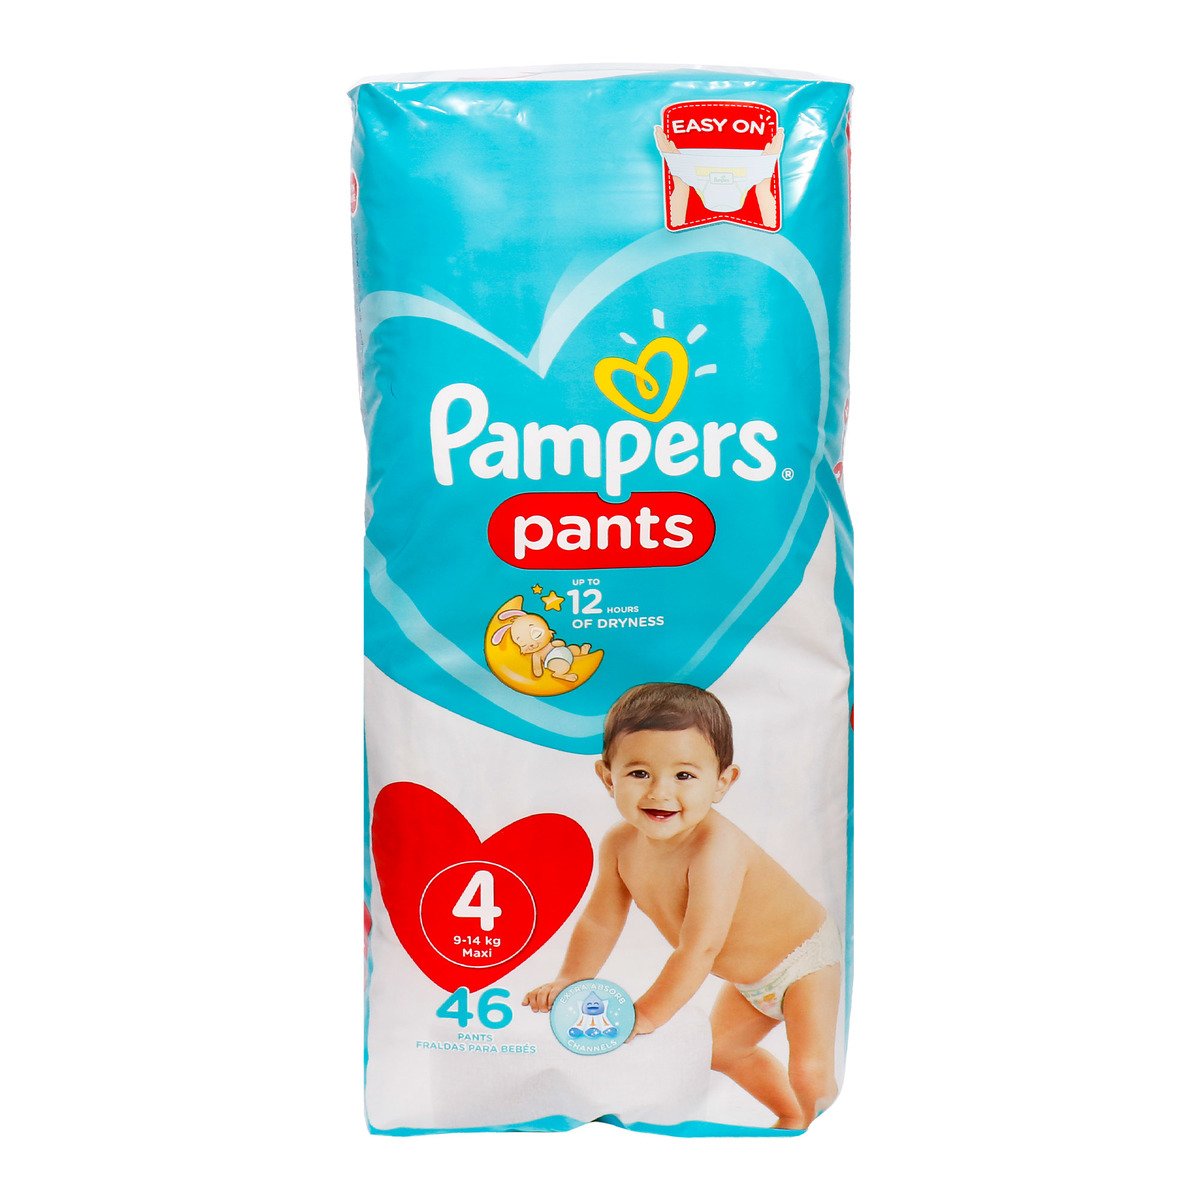 Pampers Diaper Pants Value Pack Size 4 9-14kg 46 Count